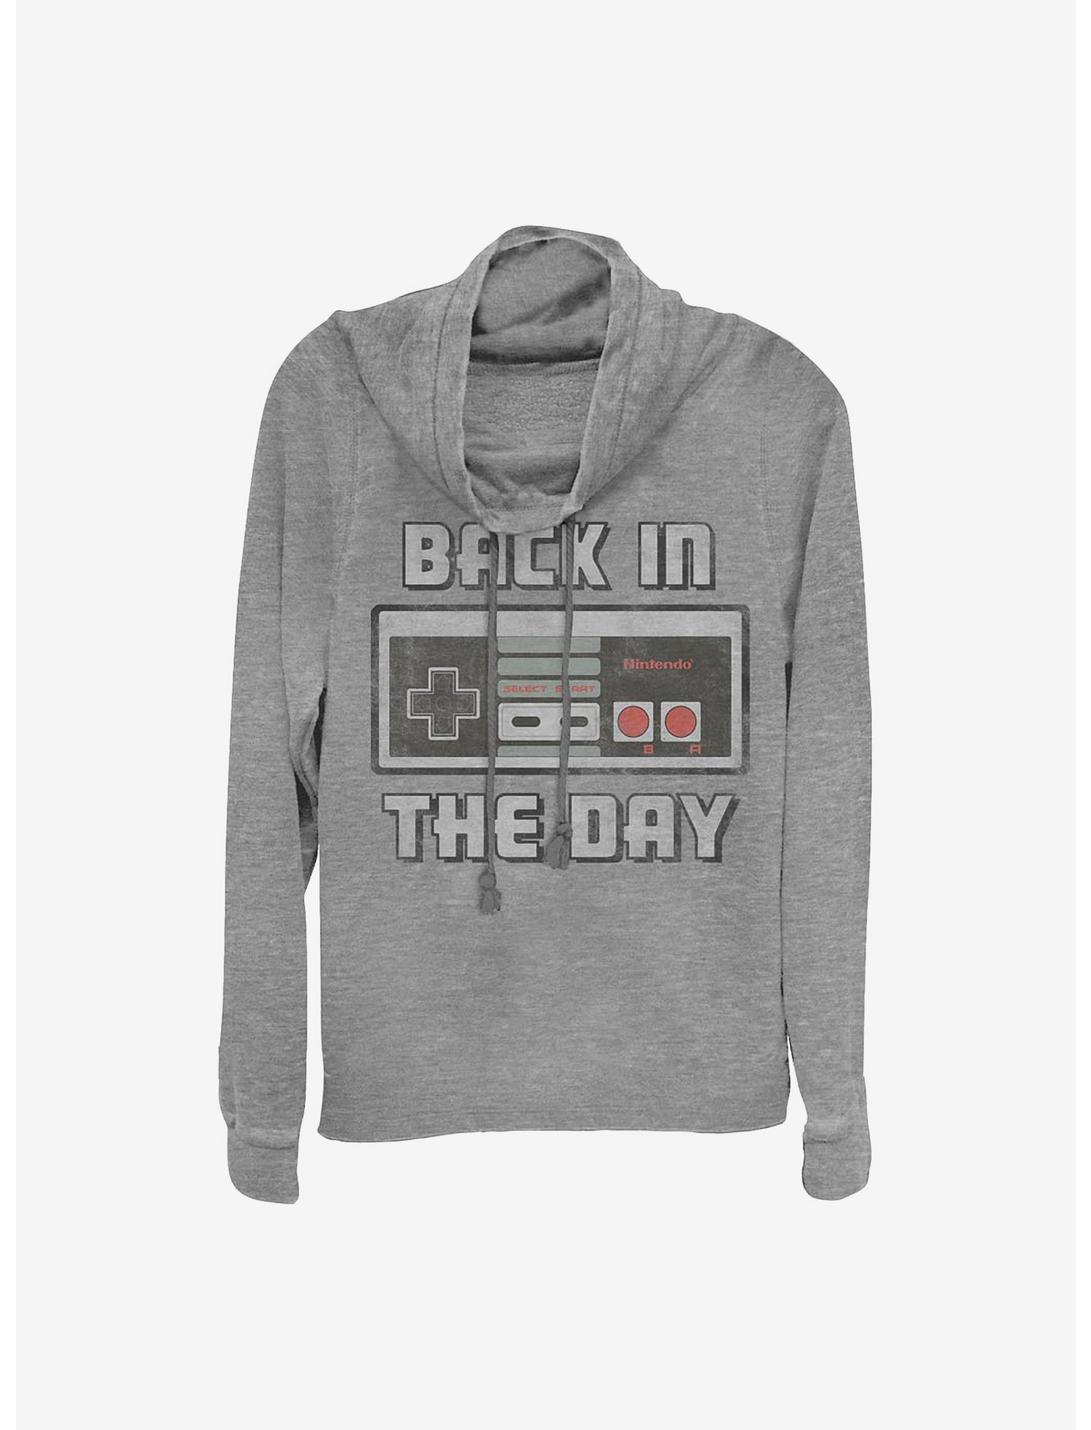 Nintendo Back In The Day Cowlneck Long-Sleeve Girls Top, GRAY HTR, hi-res